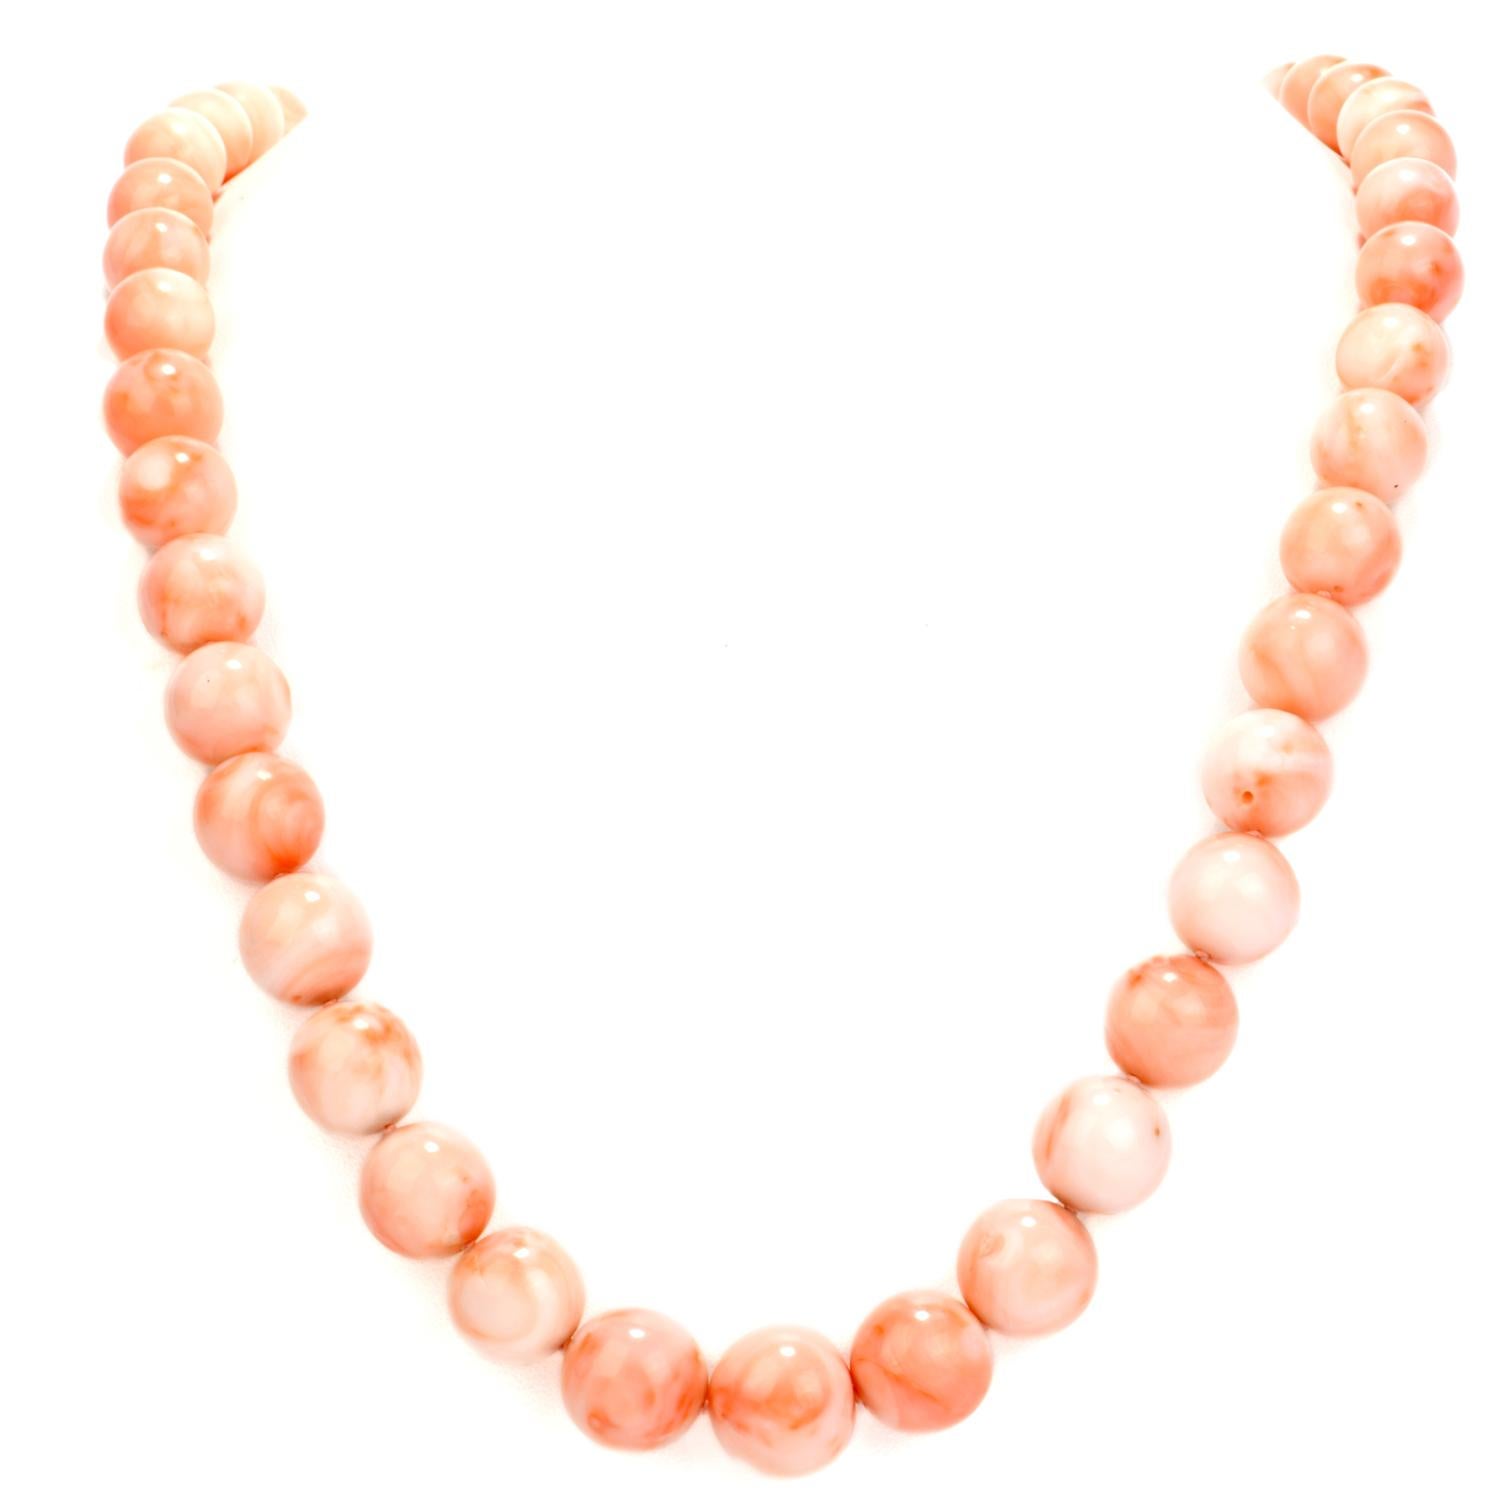 Indulge in this significant natural Coral 15 mm Graduated Necklace.  Each large coral graduated bead ranges from15-10 mm in width.  The necklace spans 25 inches long around the neckline.  The marbled pattern on each bead will send you to bliss with